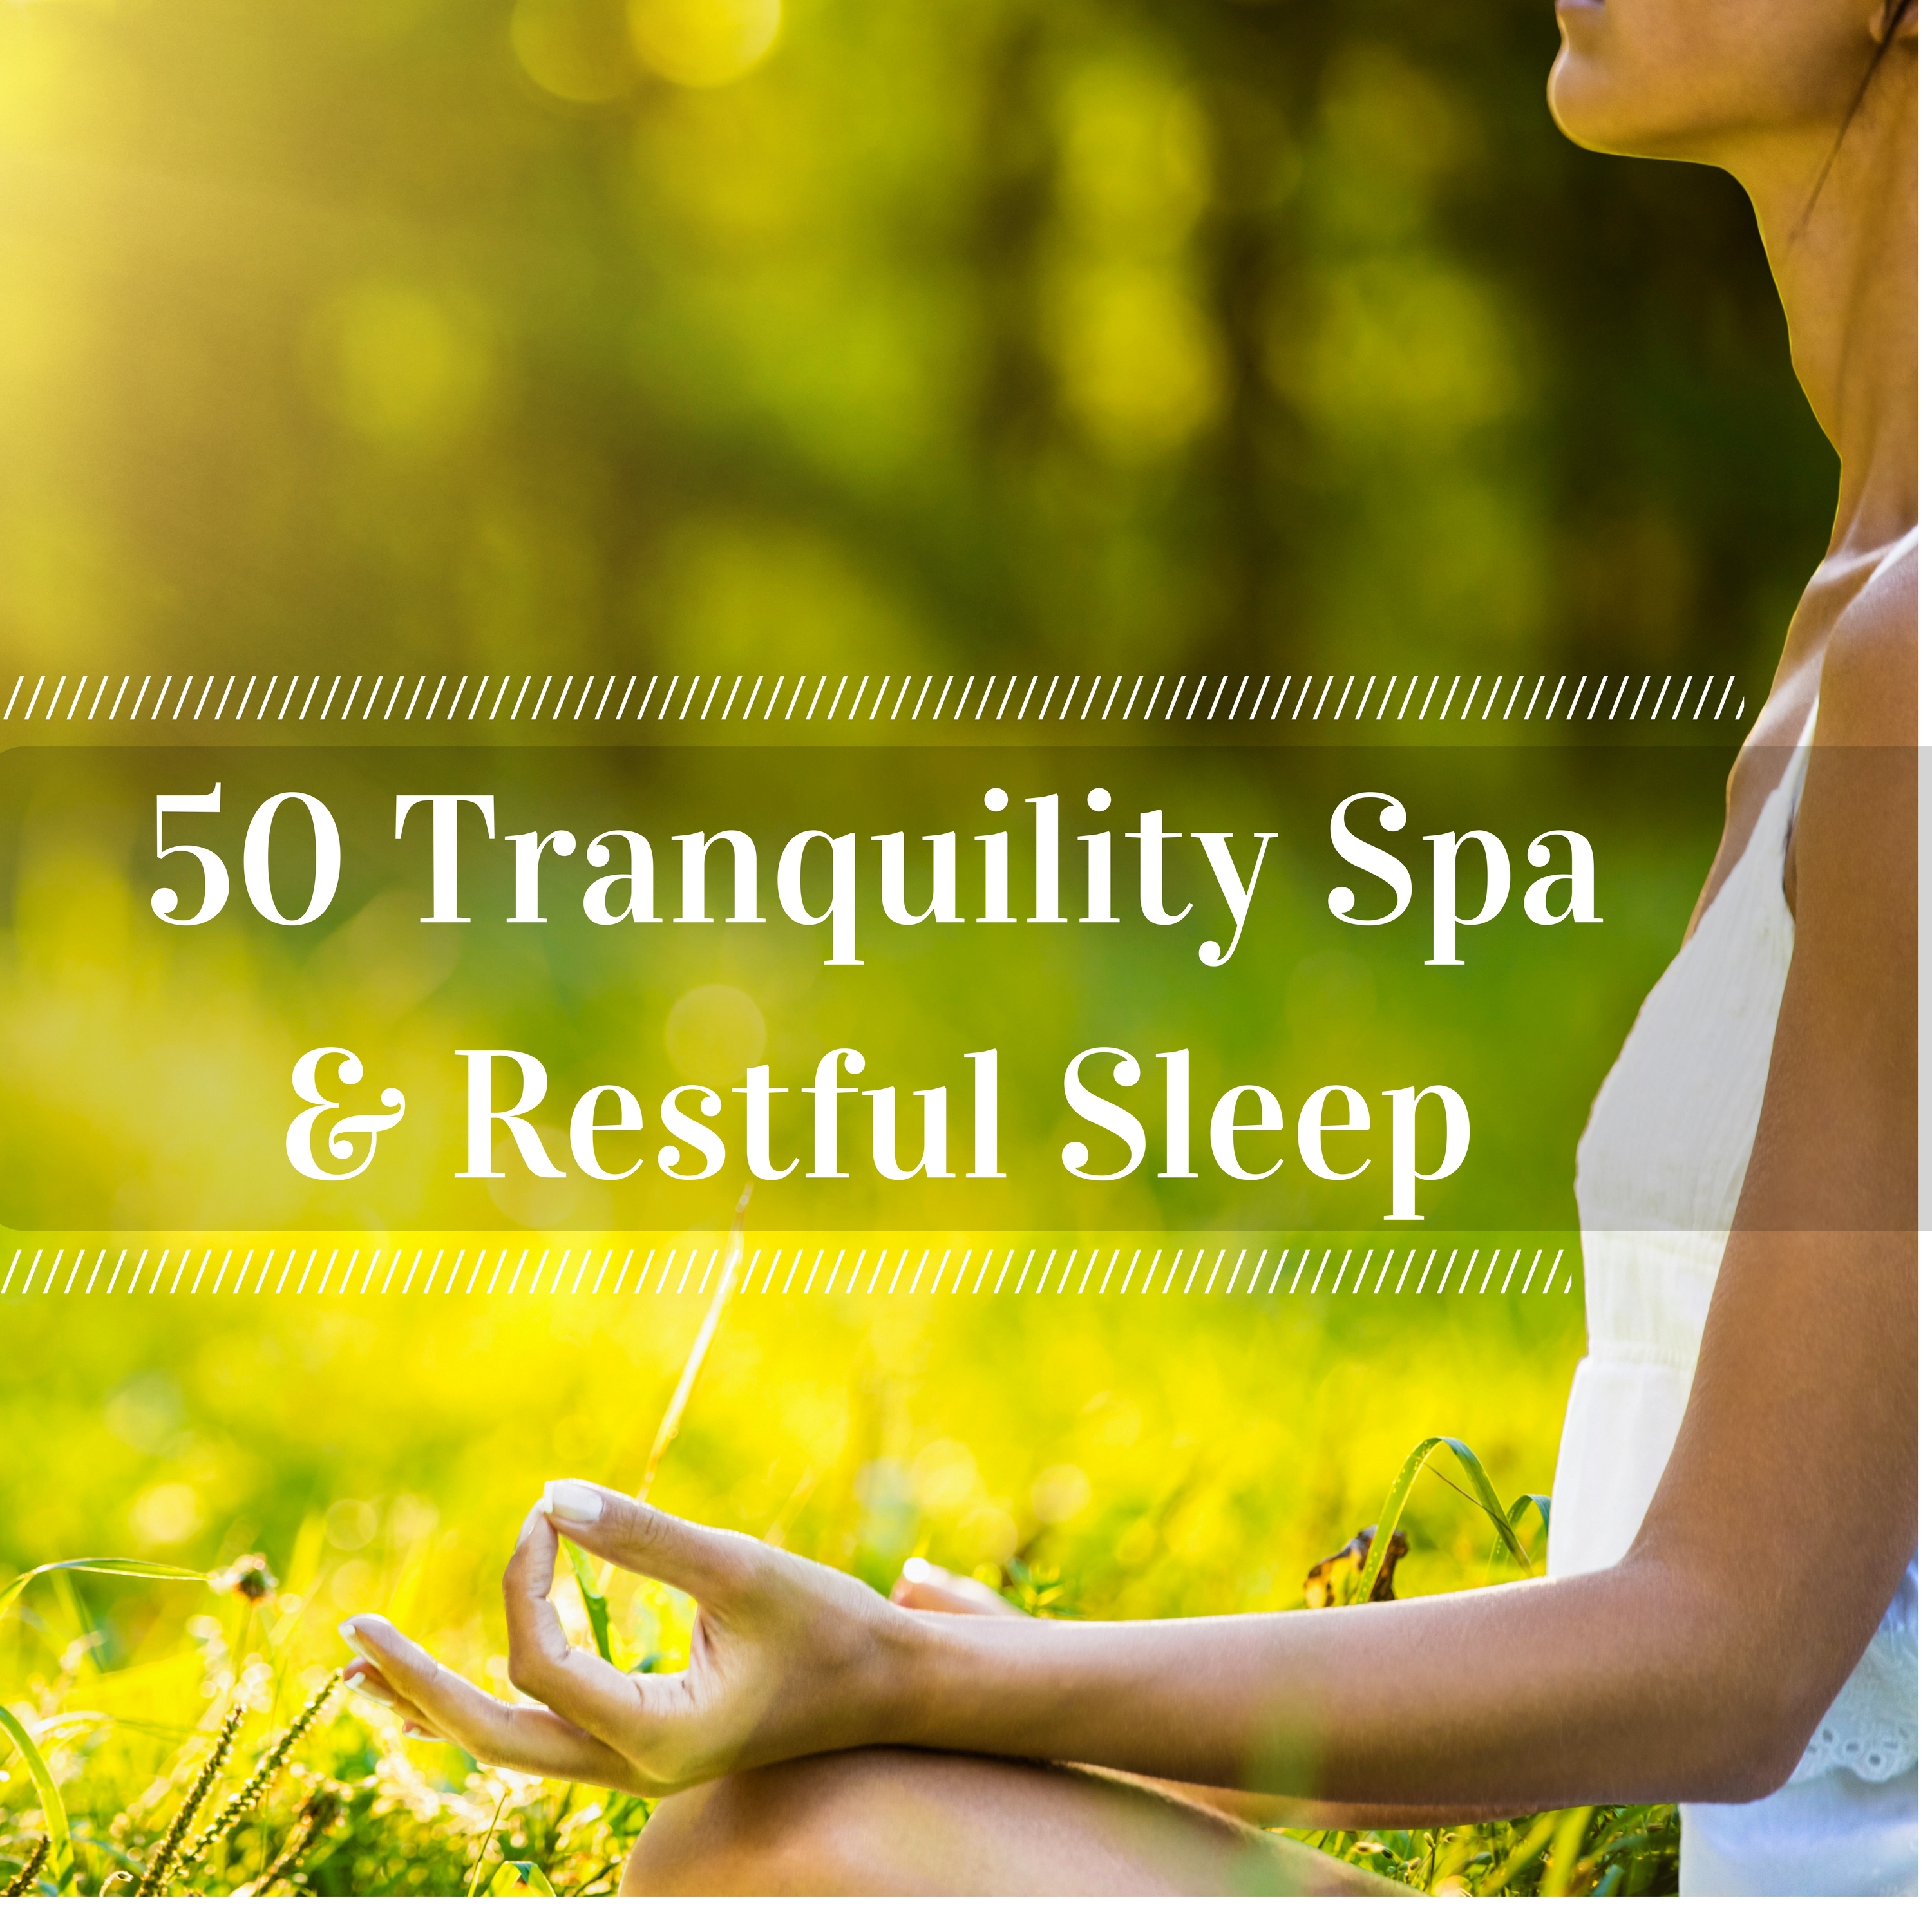 50 Tranquility Spa & Restful Sleep with The Deep Massage Music Tribe